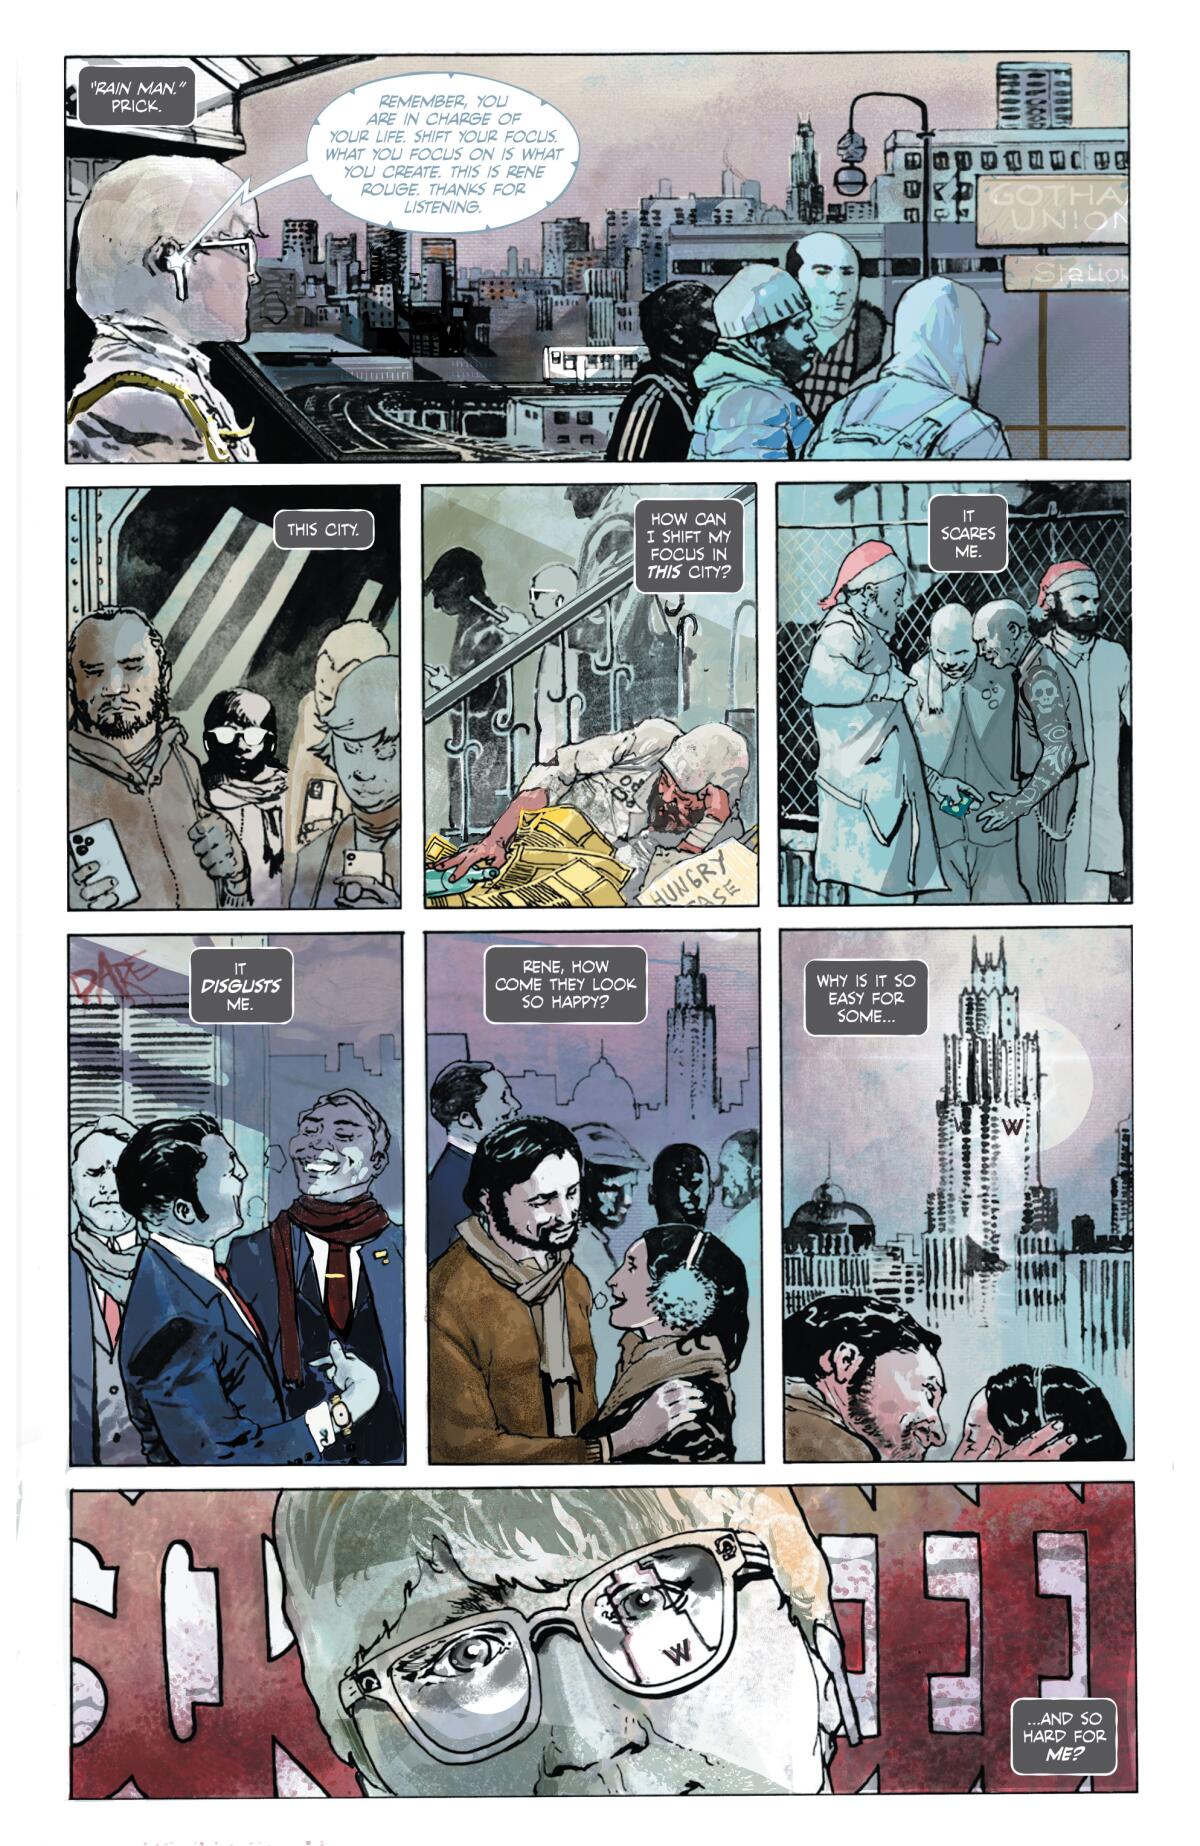 A page of art panels inside an issue of "The Riddler" comic book.